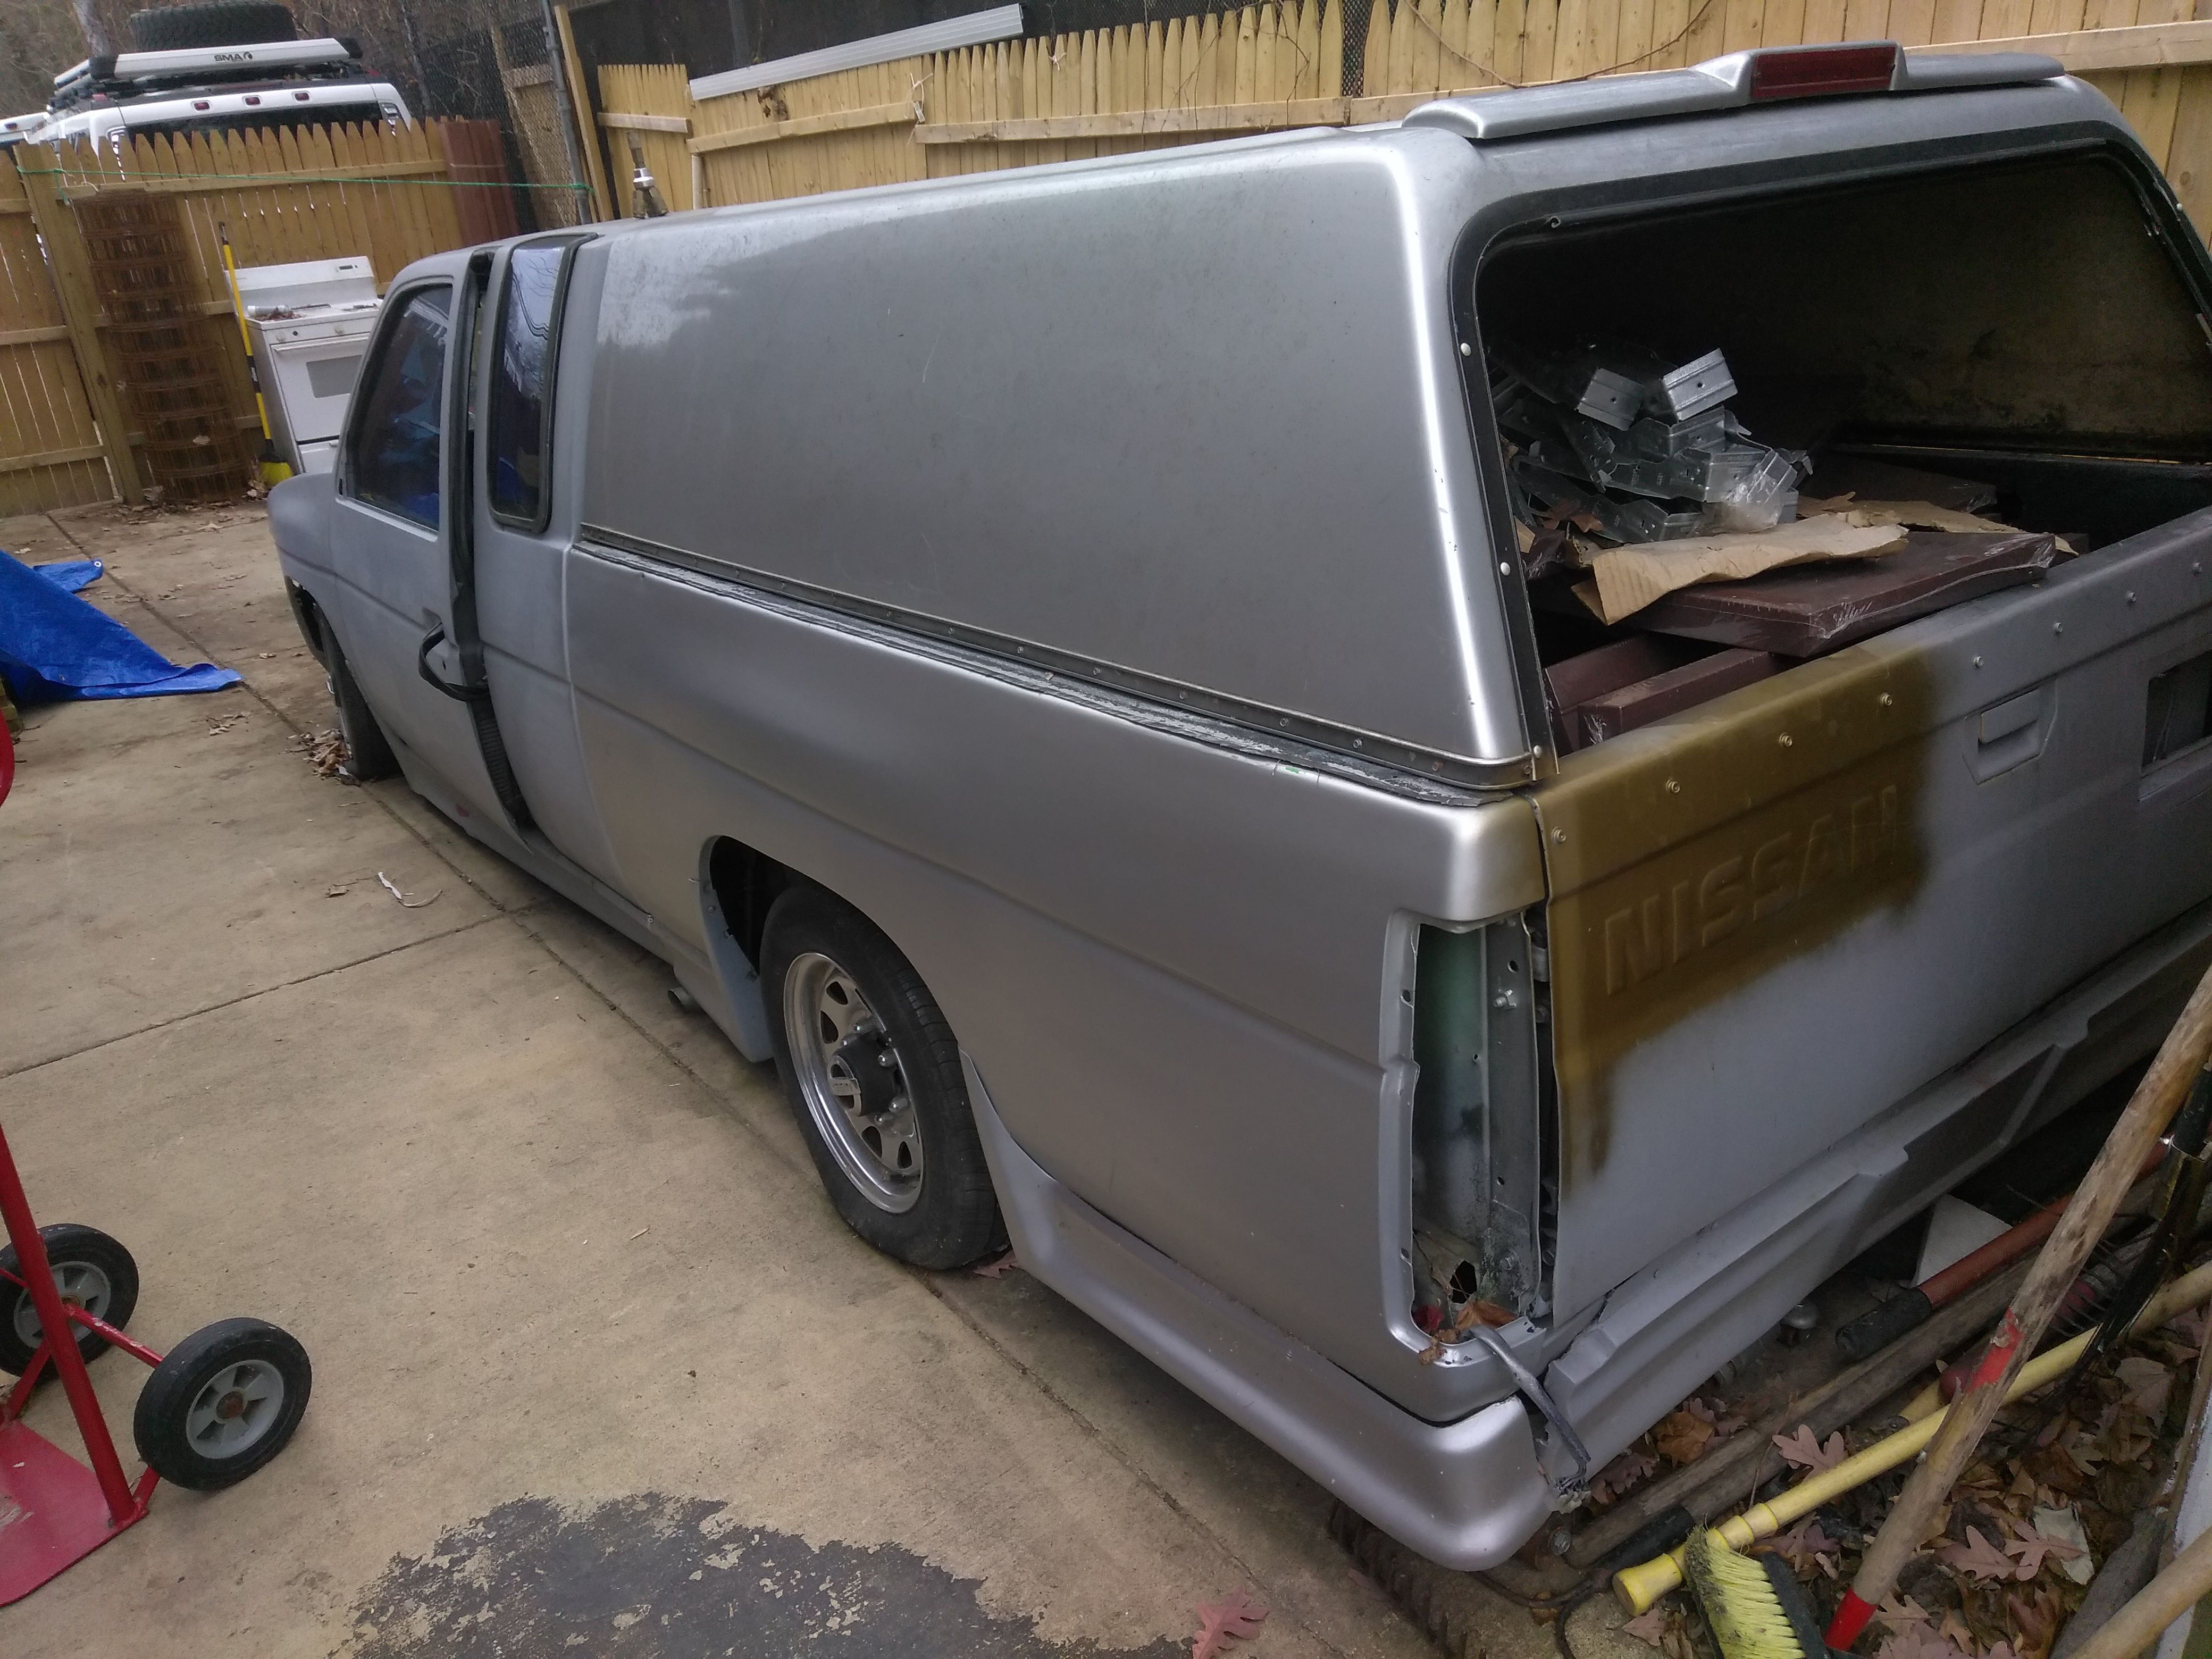 1990 Nissan pick up project truck everything works